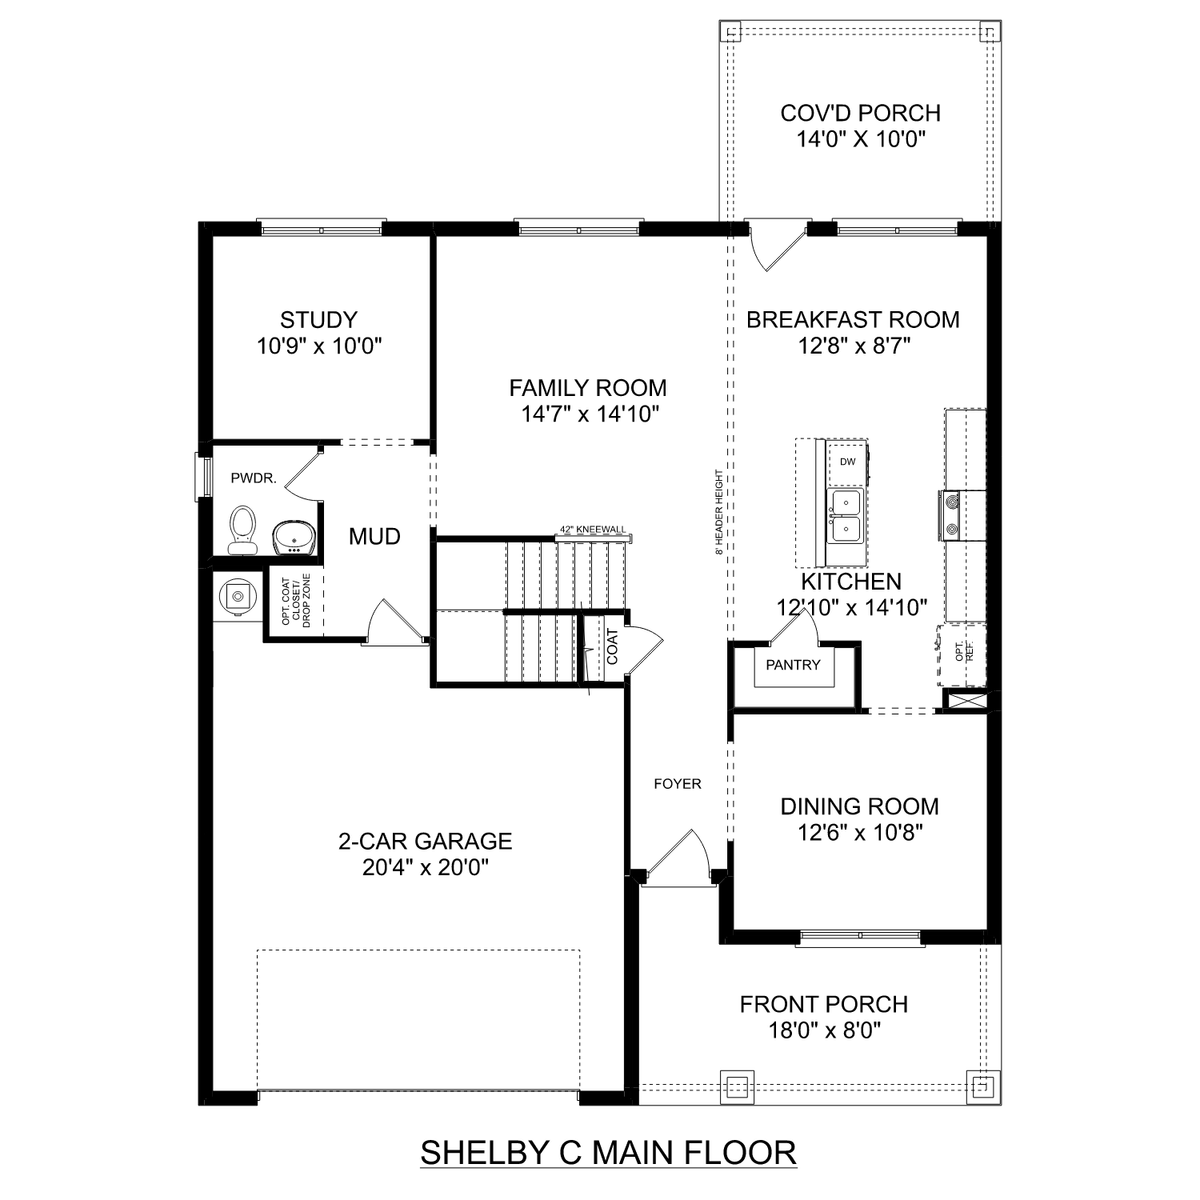 1 - The Shelby C buildable floor plan layout in Davidson Homes' Spragins Cove community.